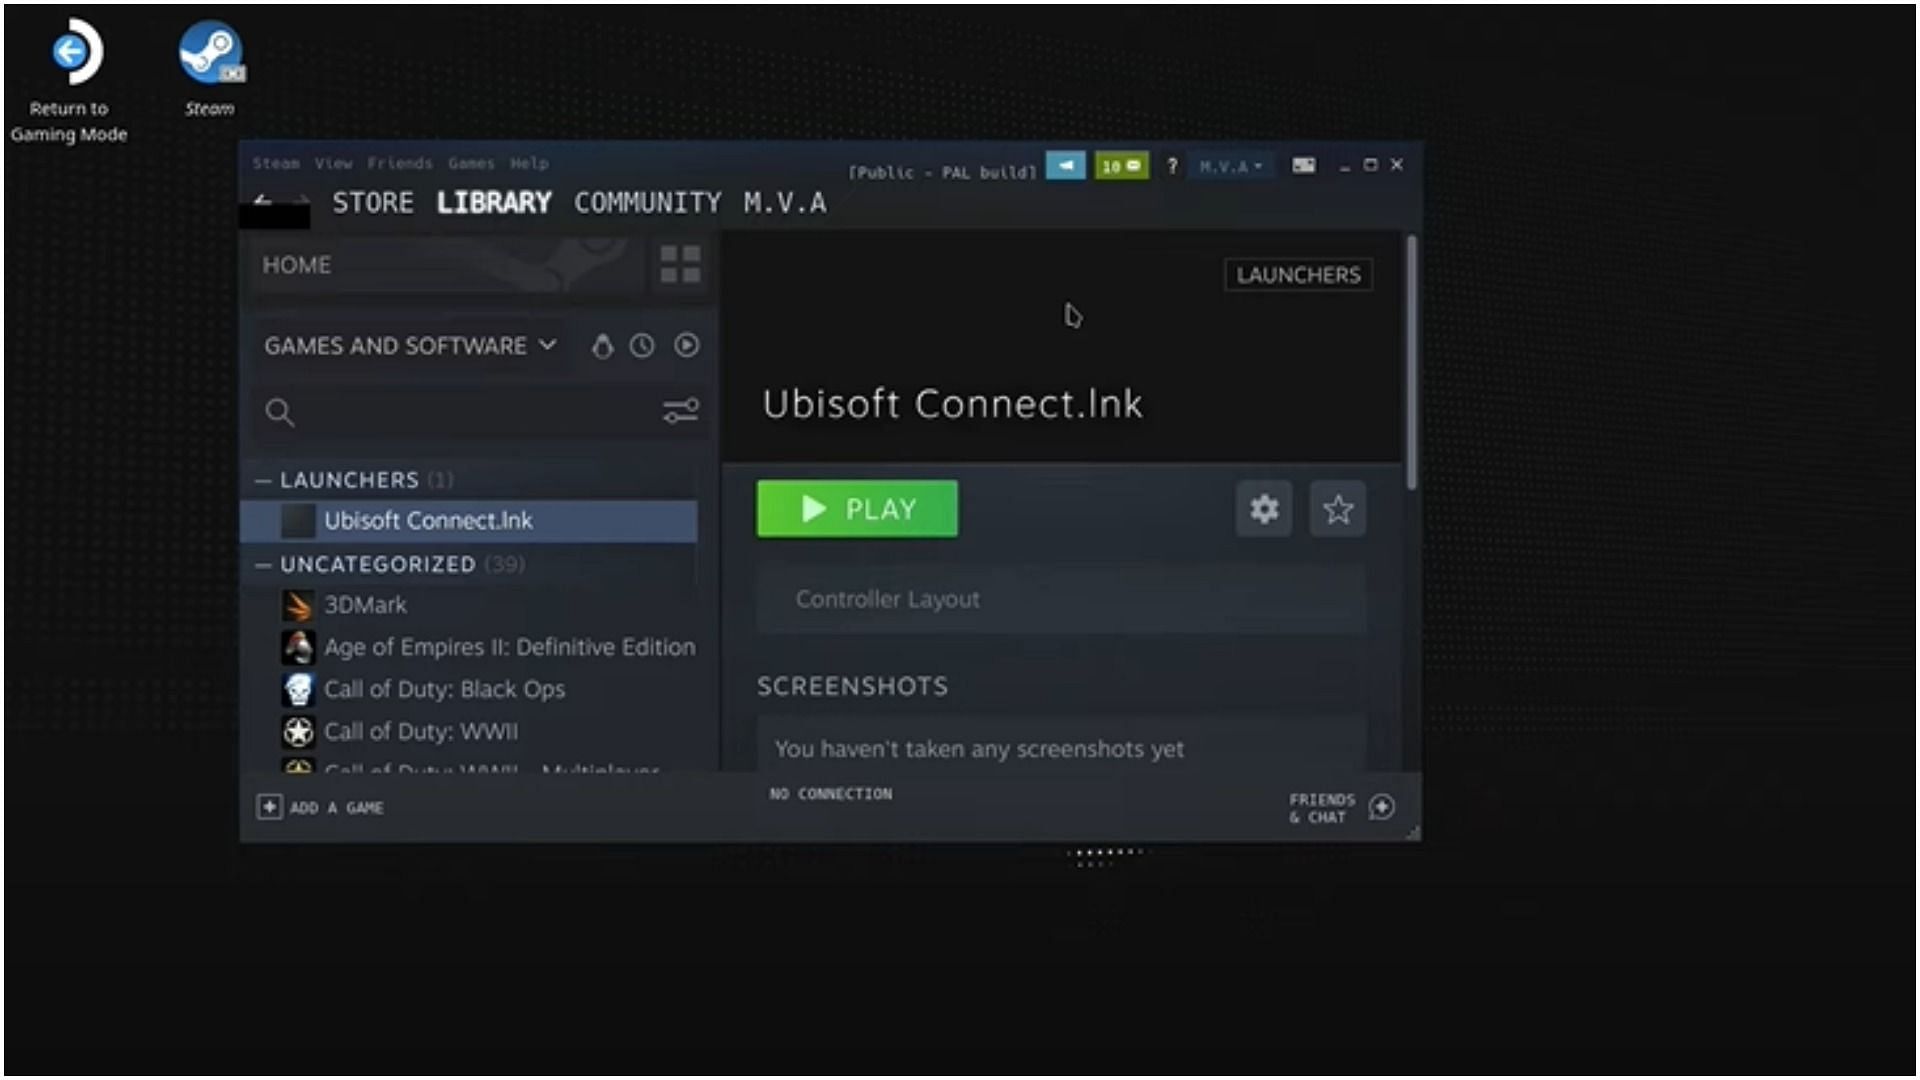 Players may also link their platform account to their Ubisoft account by using Ubisoft Connect (Image via YouTube/ MVA)